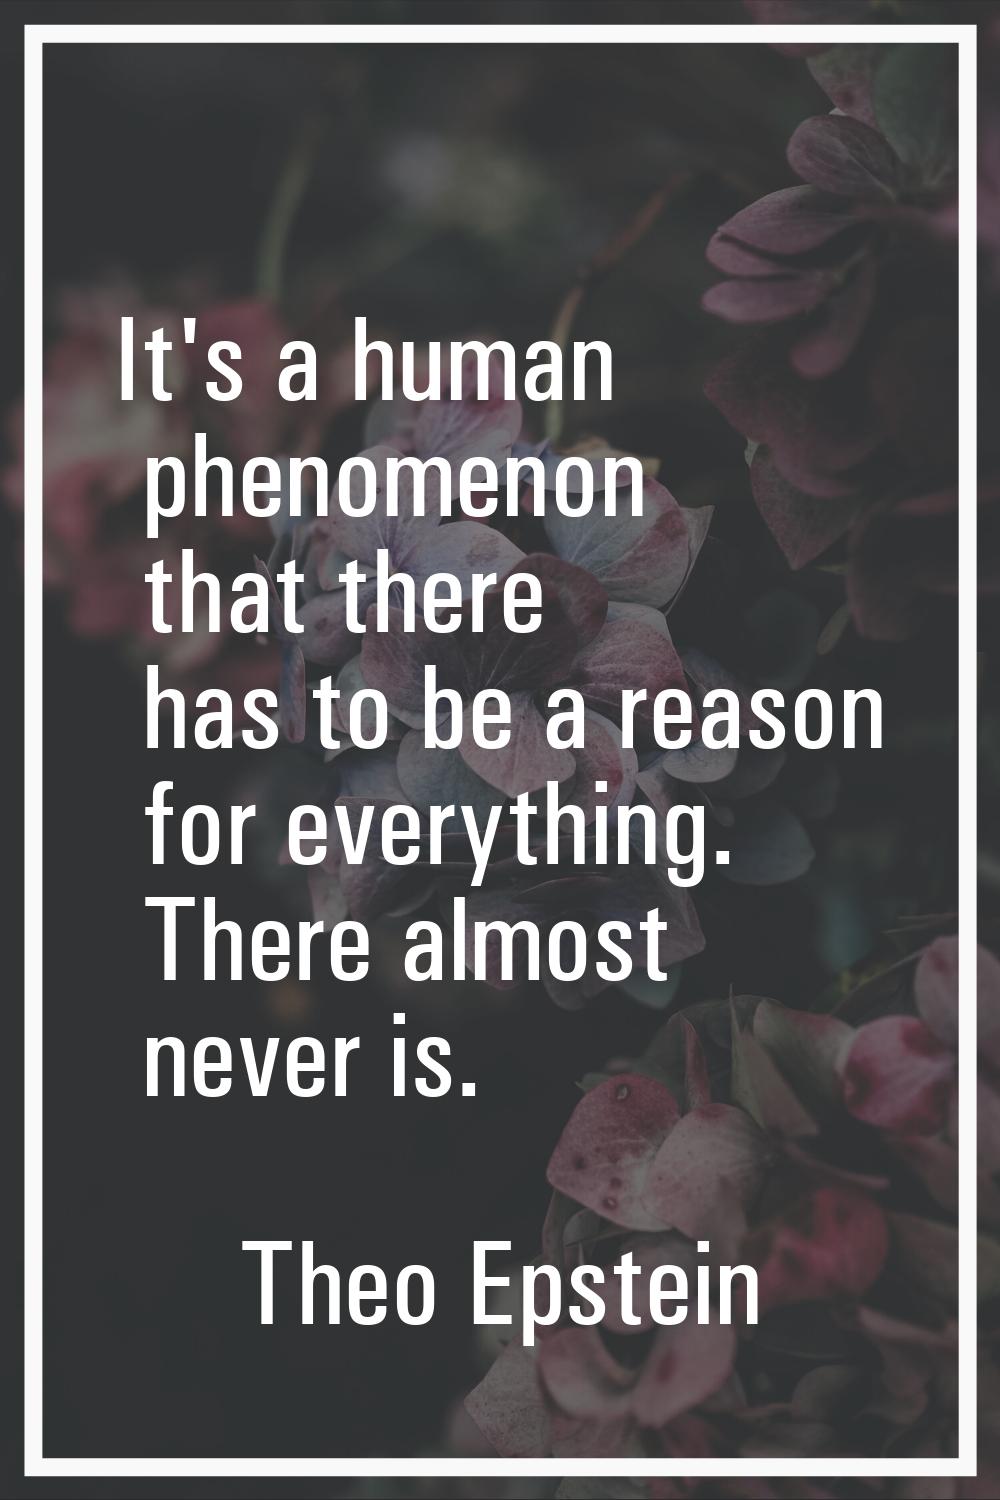 It's a human phenomenon that there has to be a reason for everything. There almost never is.